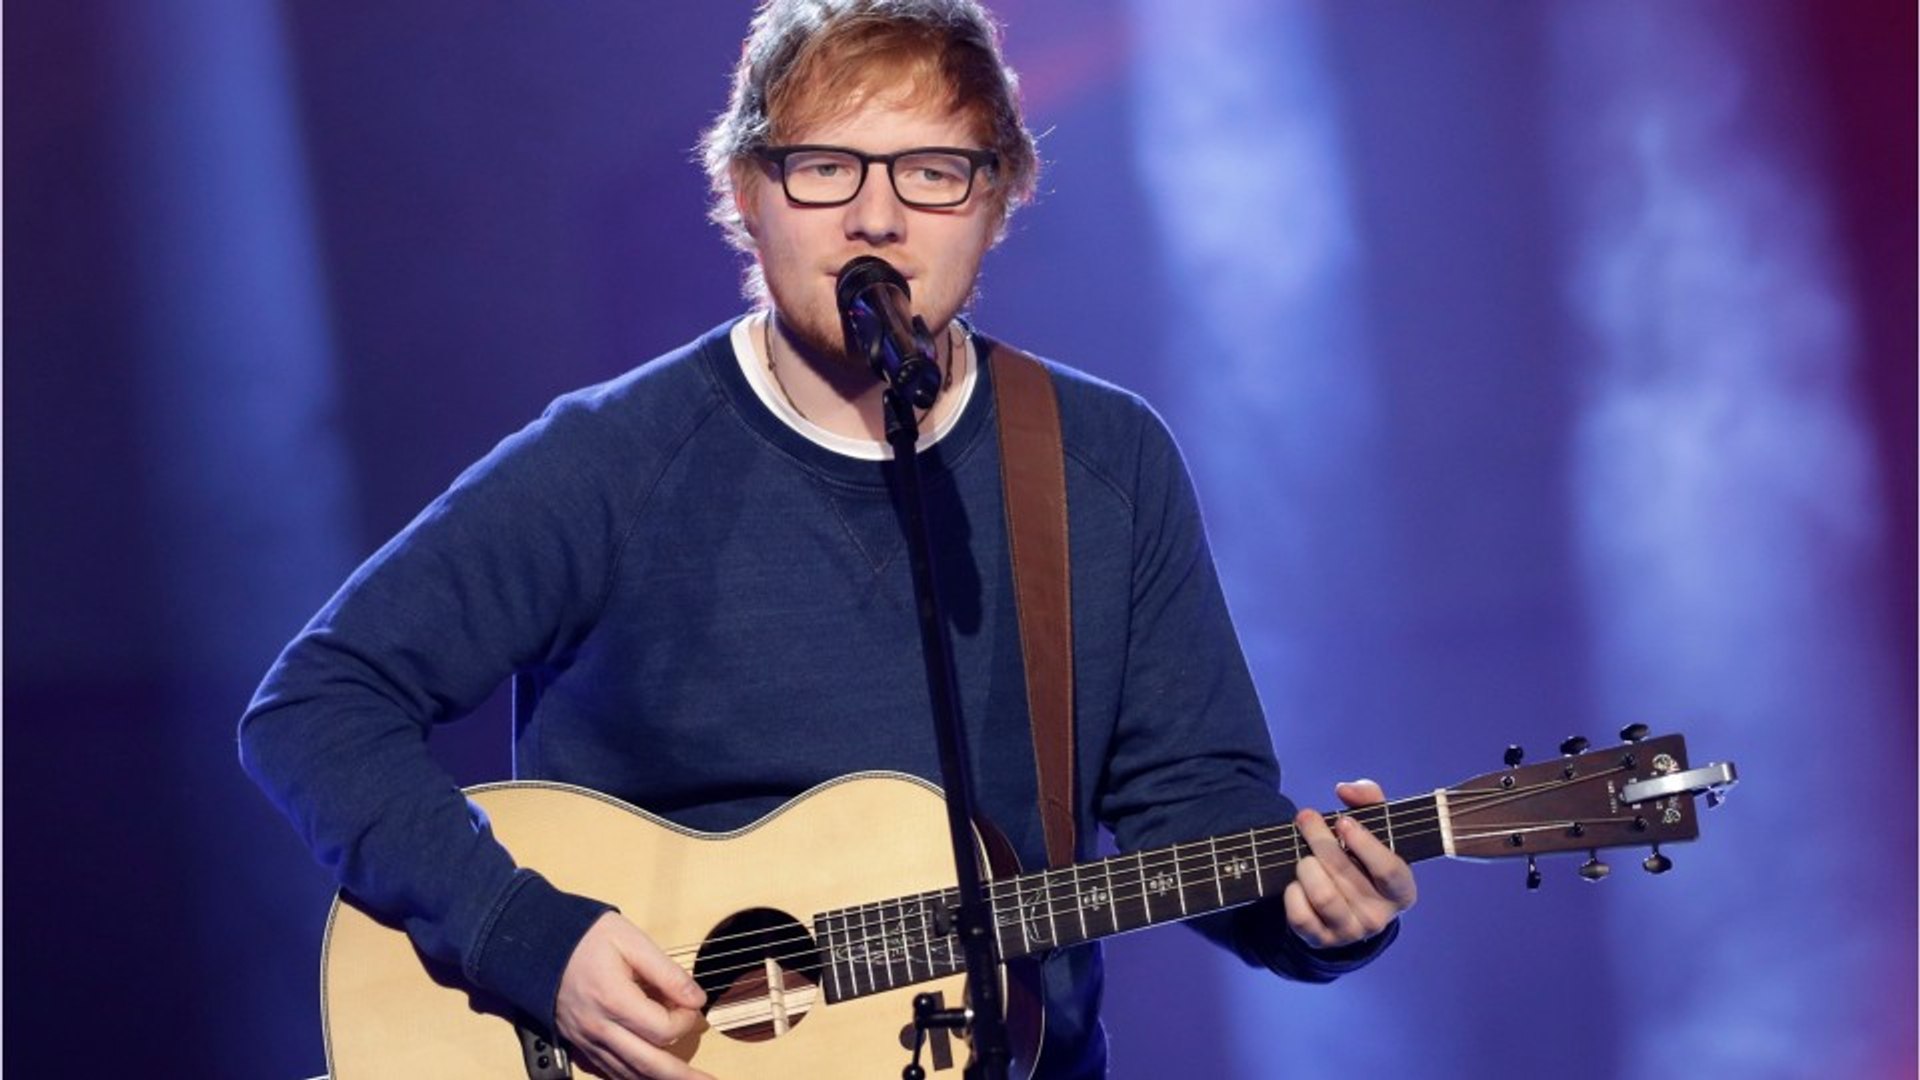 Woman Jailed After Blasting Ed Sheeran’s ‘Shape Of You’ On Repeat